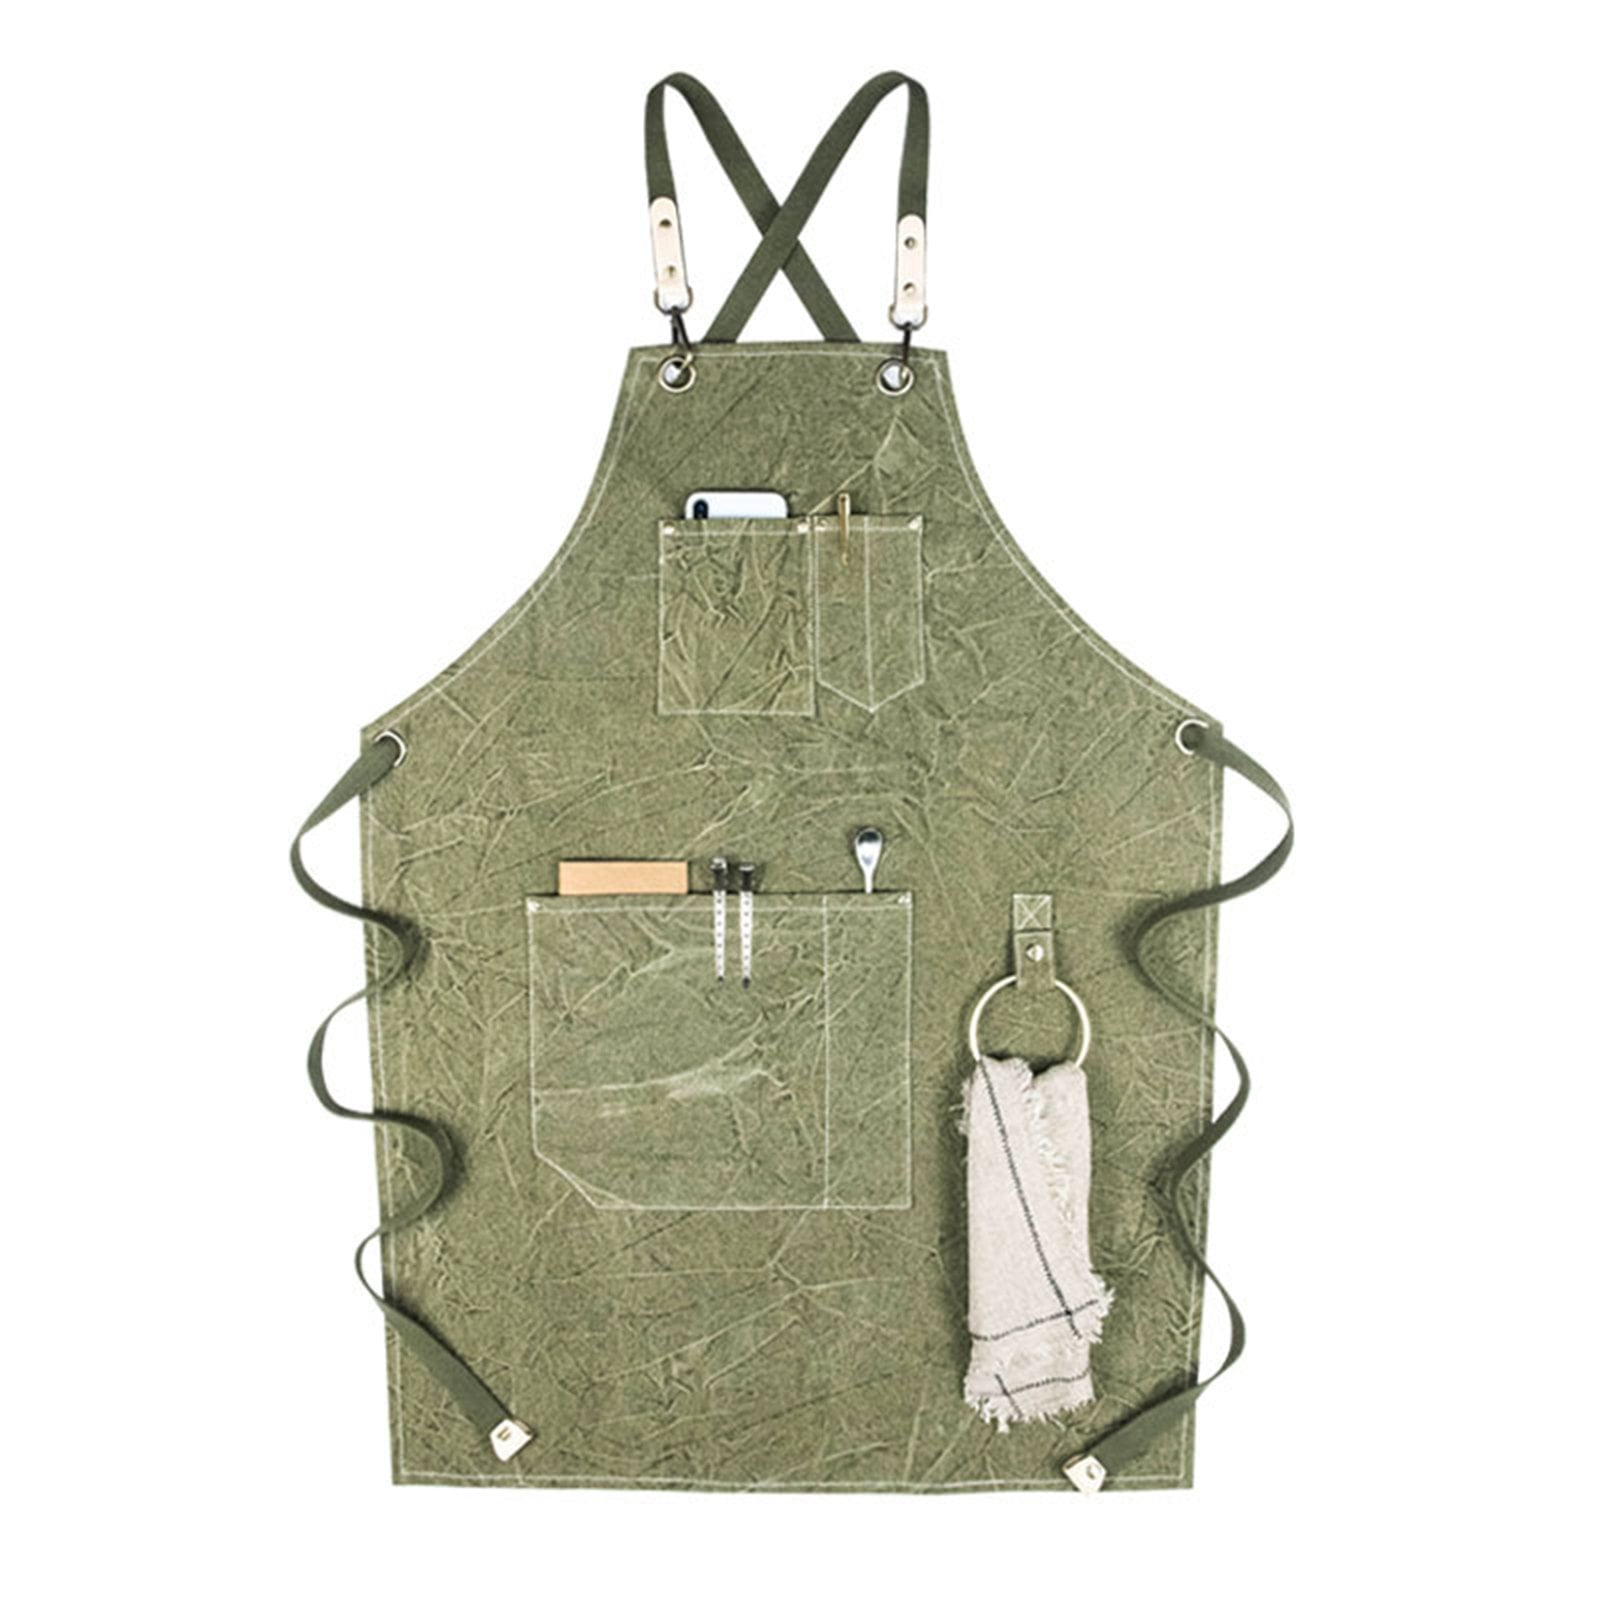  Lnrueg Adjustable Artist Apron with 10 Pockets for Women,  Canvas Apron with Adjustable Neck&Cross Back Straps for Painting Arts  Gardening : Home & Kitchen